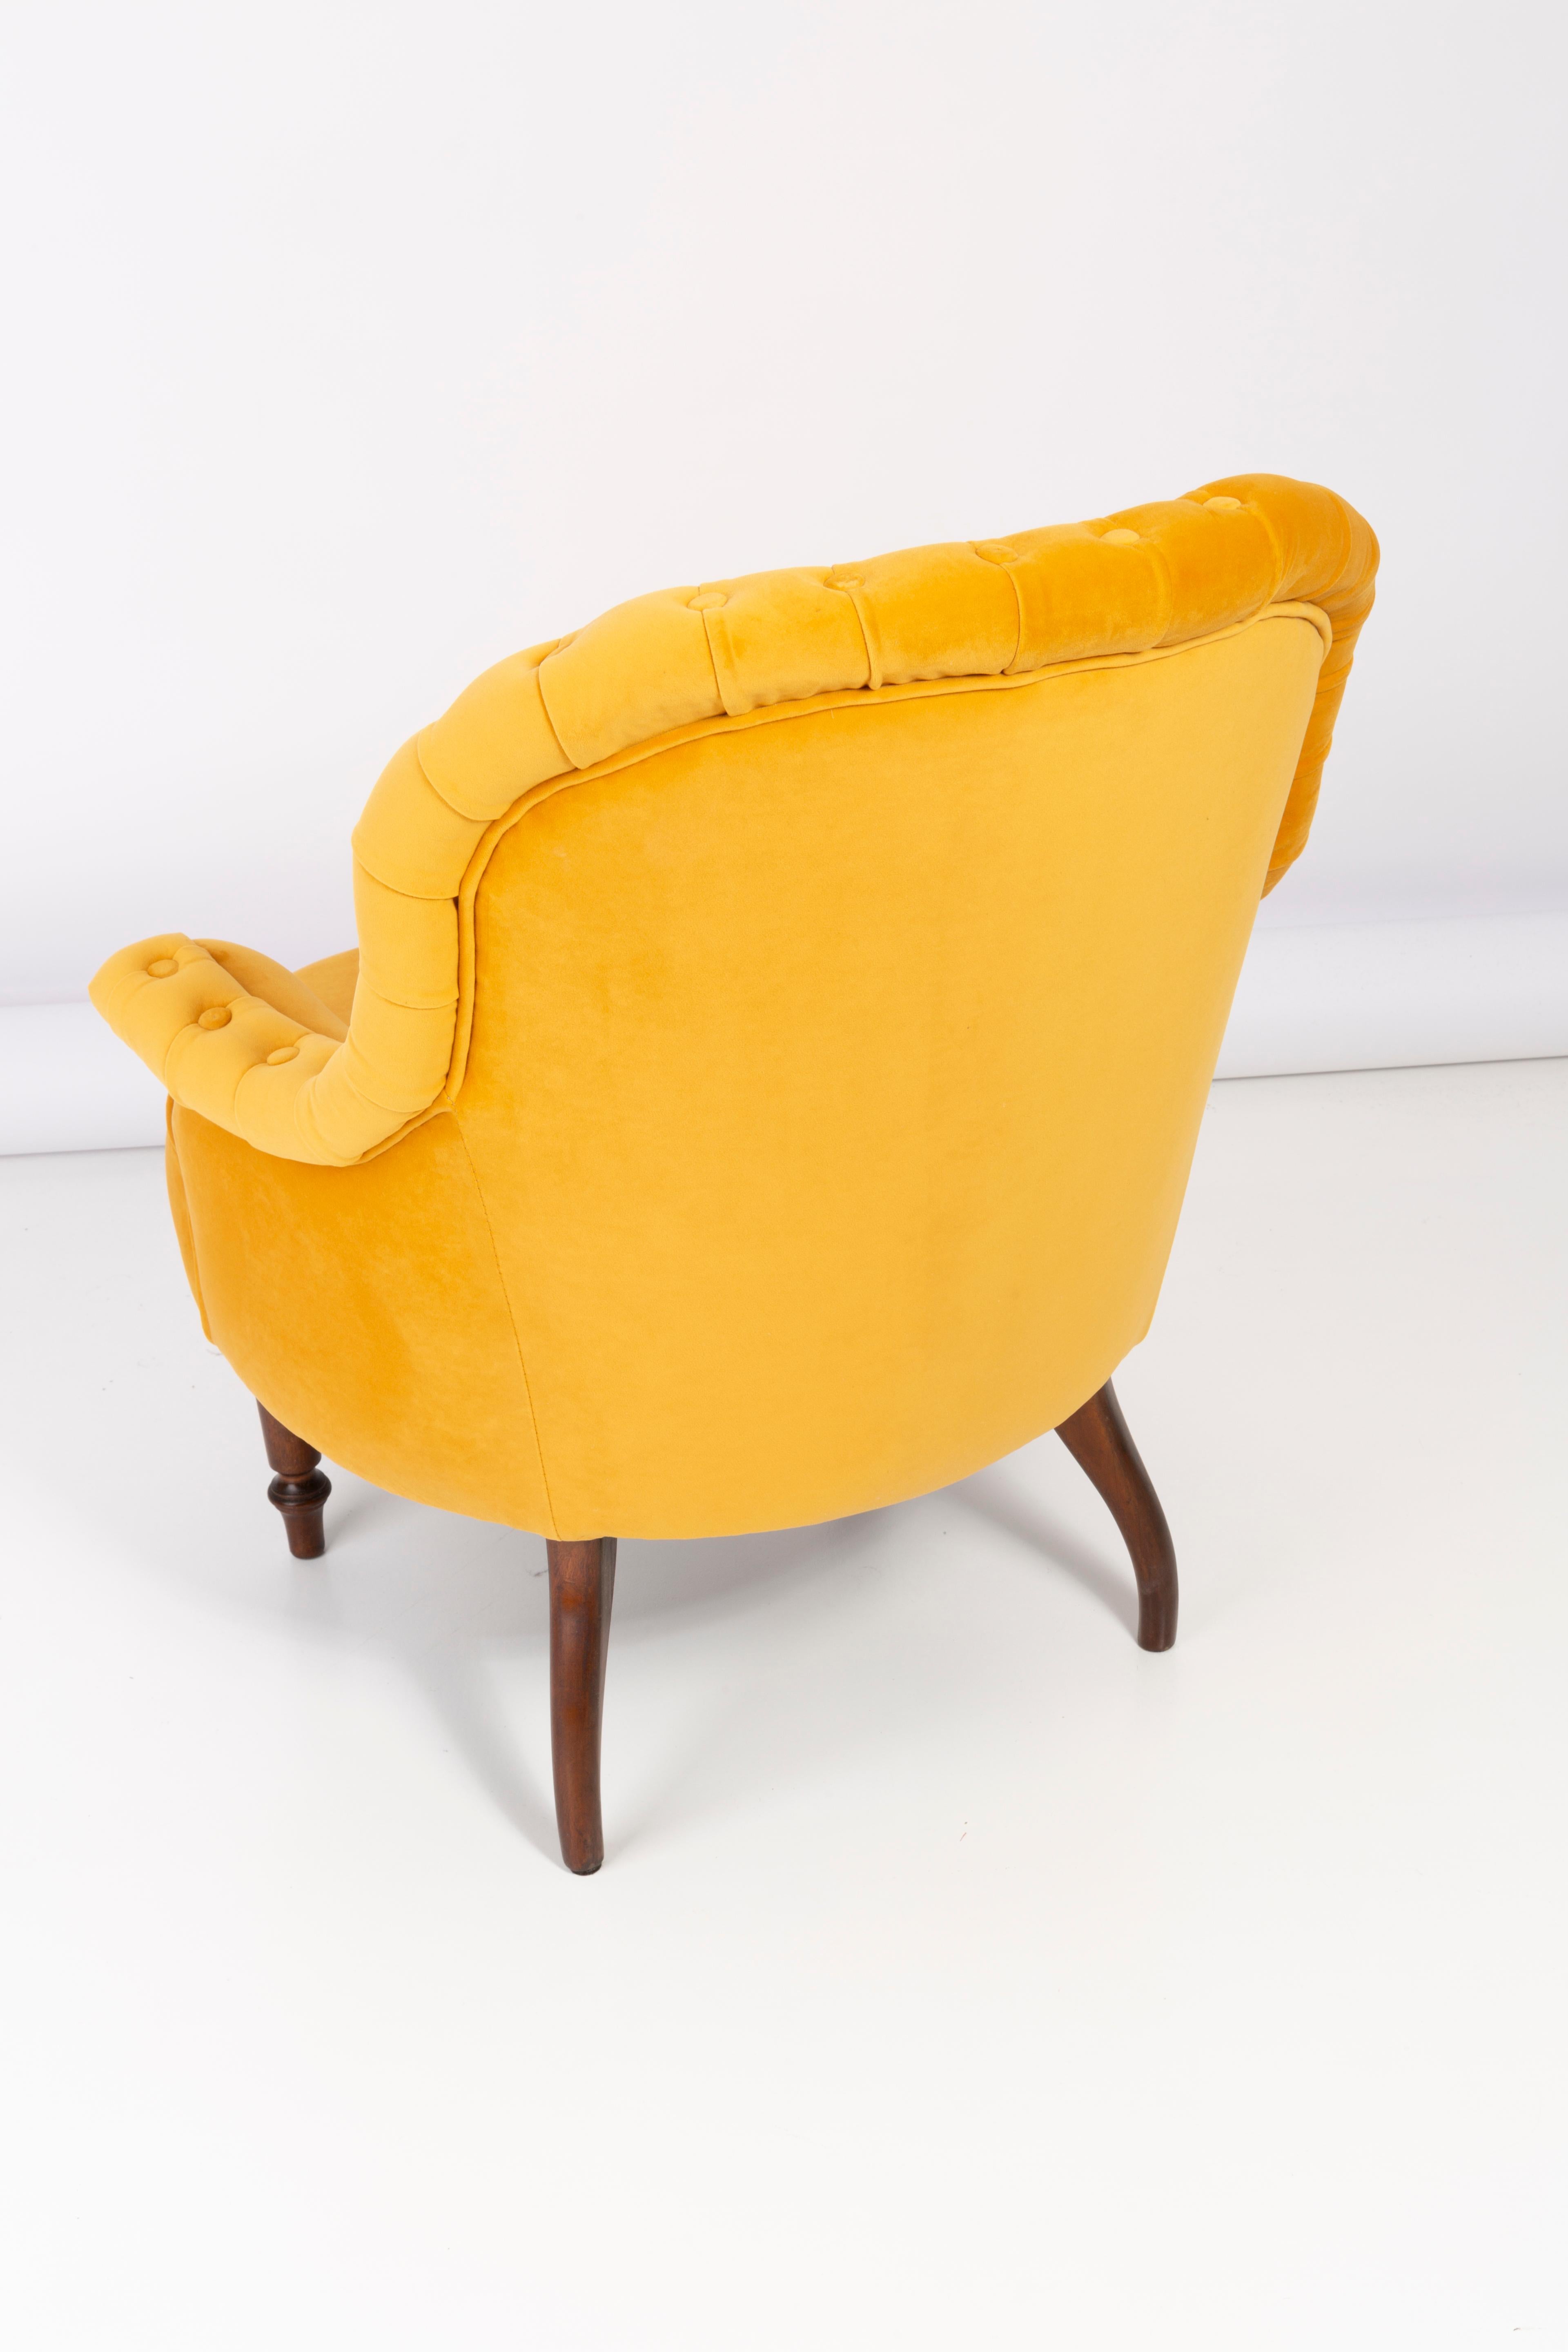 Unique Yellow Mustard Armchair, 1930s, Germany For Sale 3